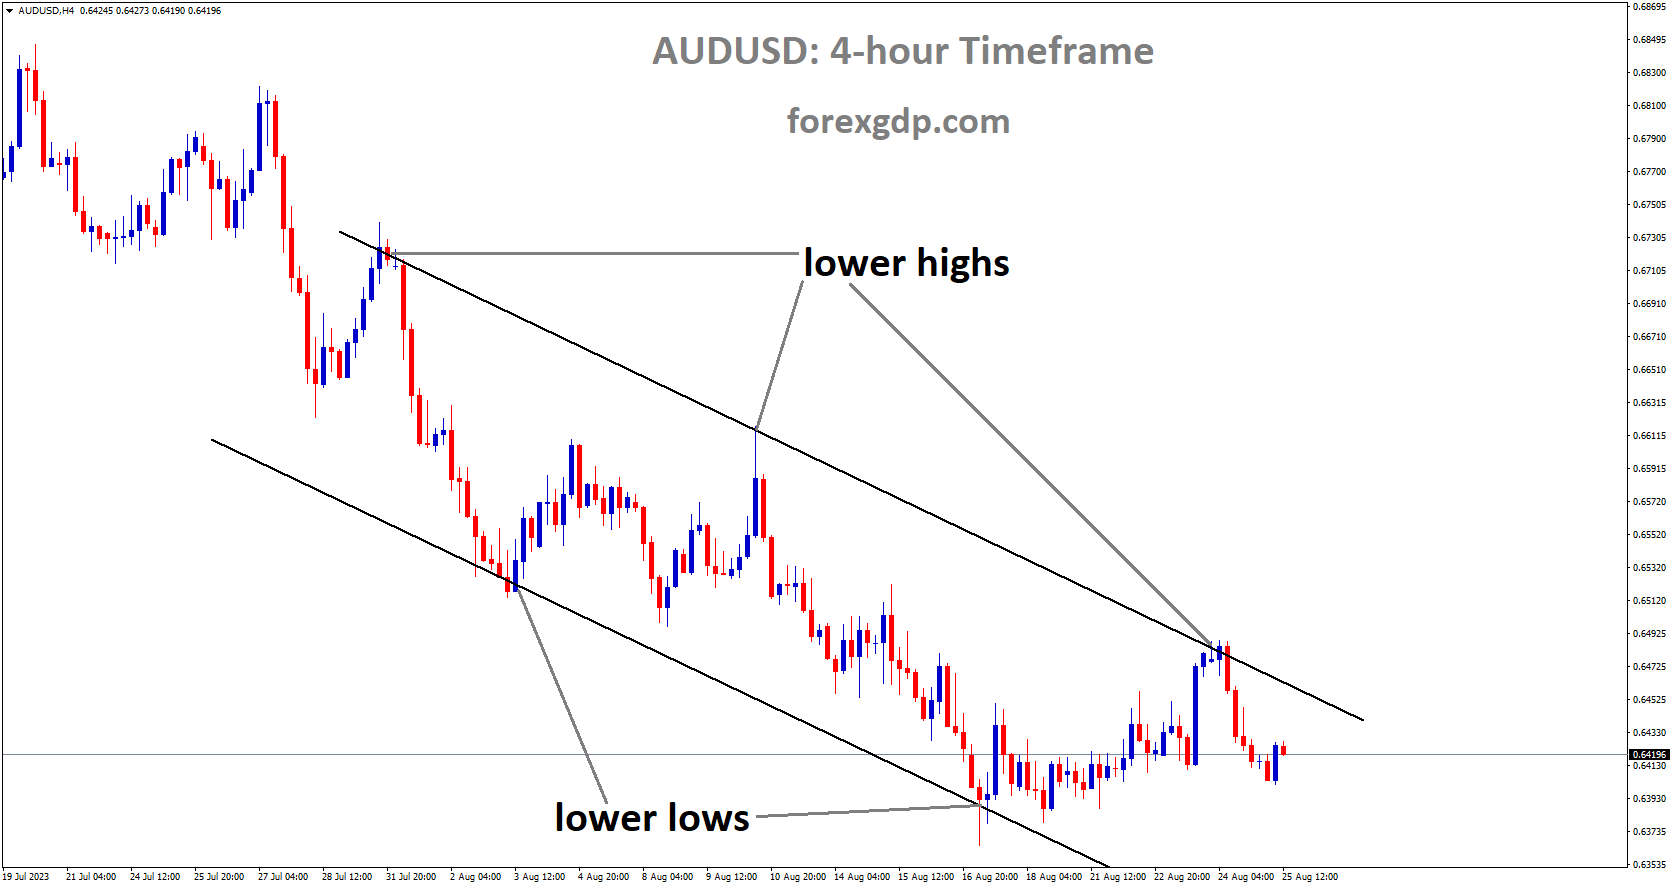 AUDUSD is moving in Descending channel and market has fallen from the lower high area of the channel